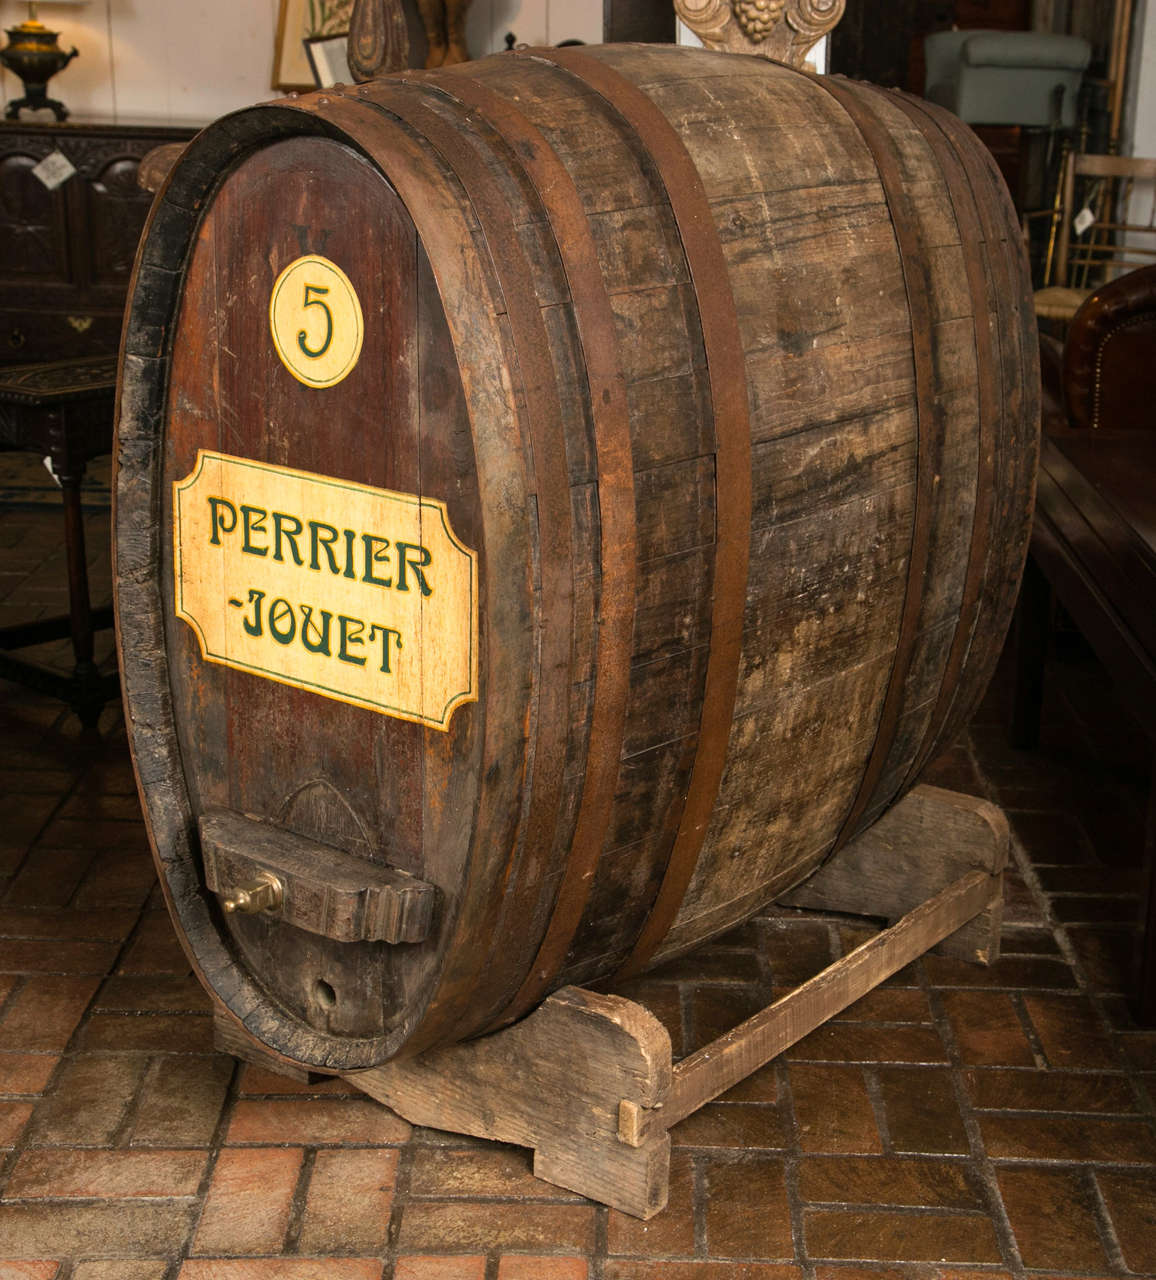 This 300+ liter, oak wine barrel has aged almost as well as the wine it once held. Its impressive size and patina makes for a delightful conversation piece and the Perrier-Jouet painted decoration only adds to the topic of fine wines. On a heavy